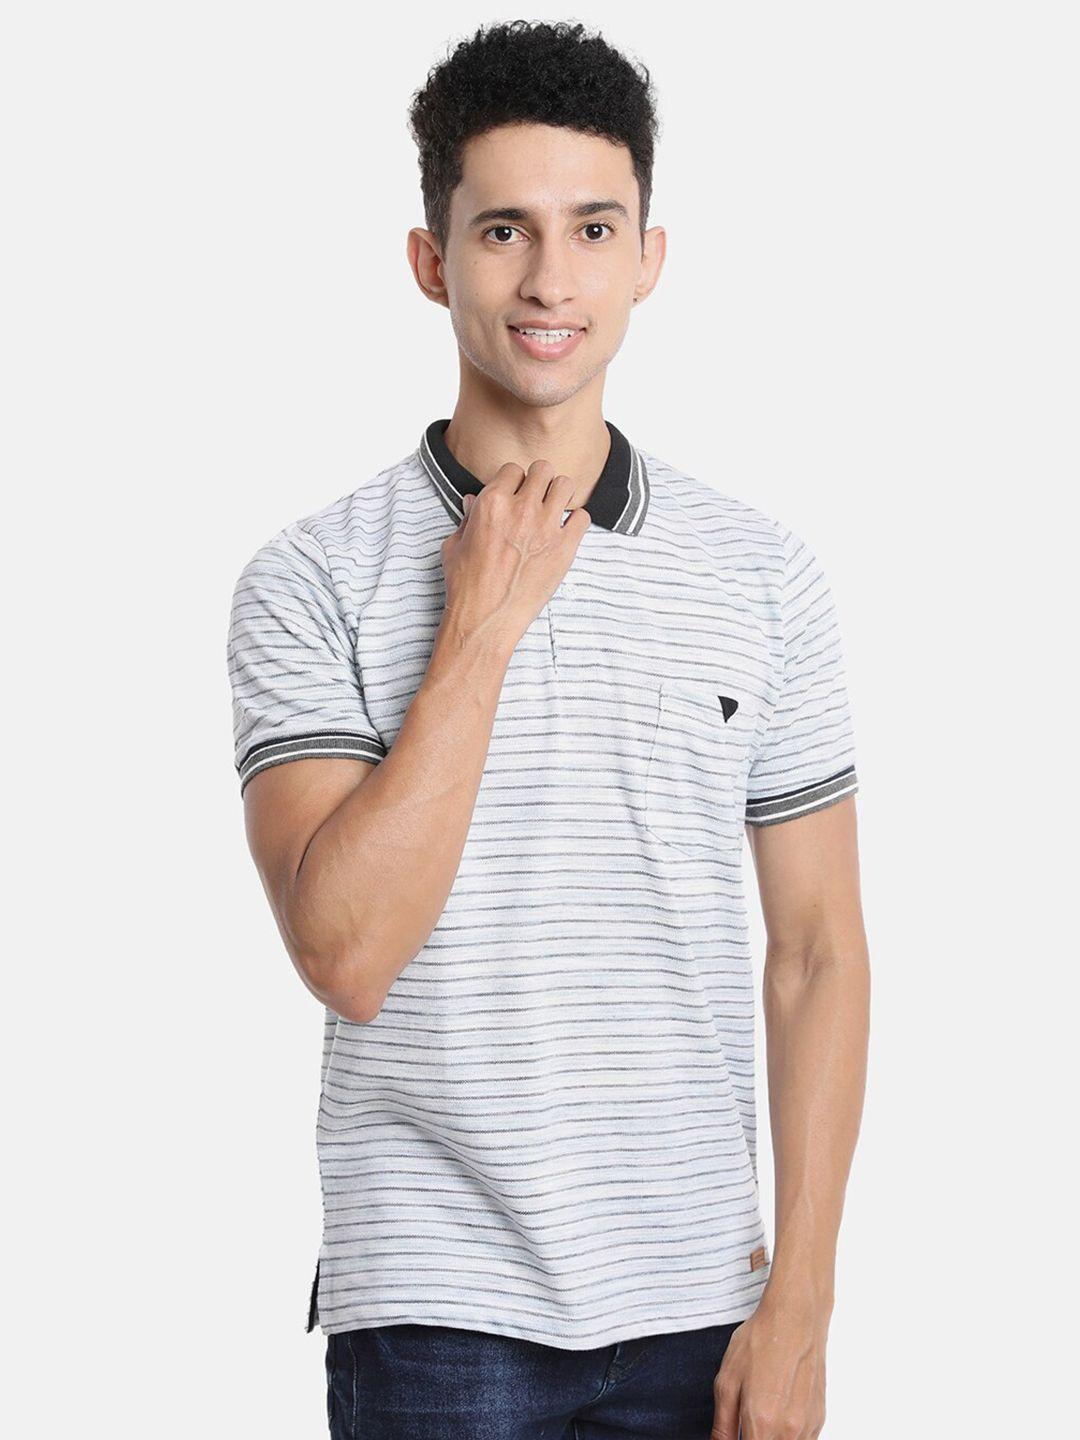 campus sutra men white & black striped polo collar regular fit outdoor t-shirt